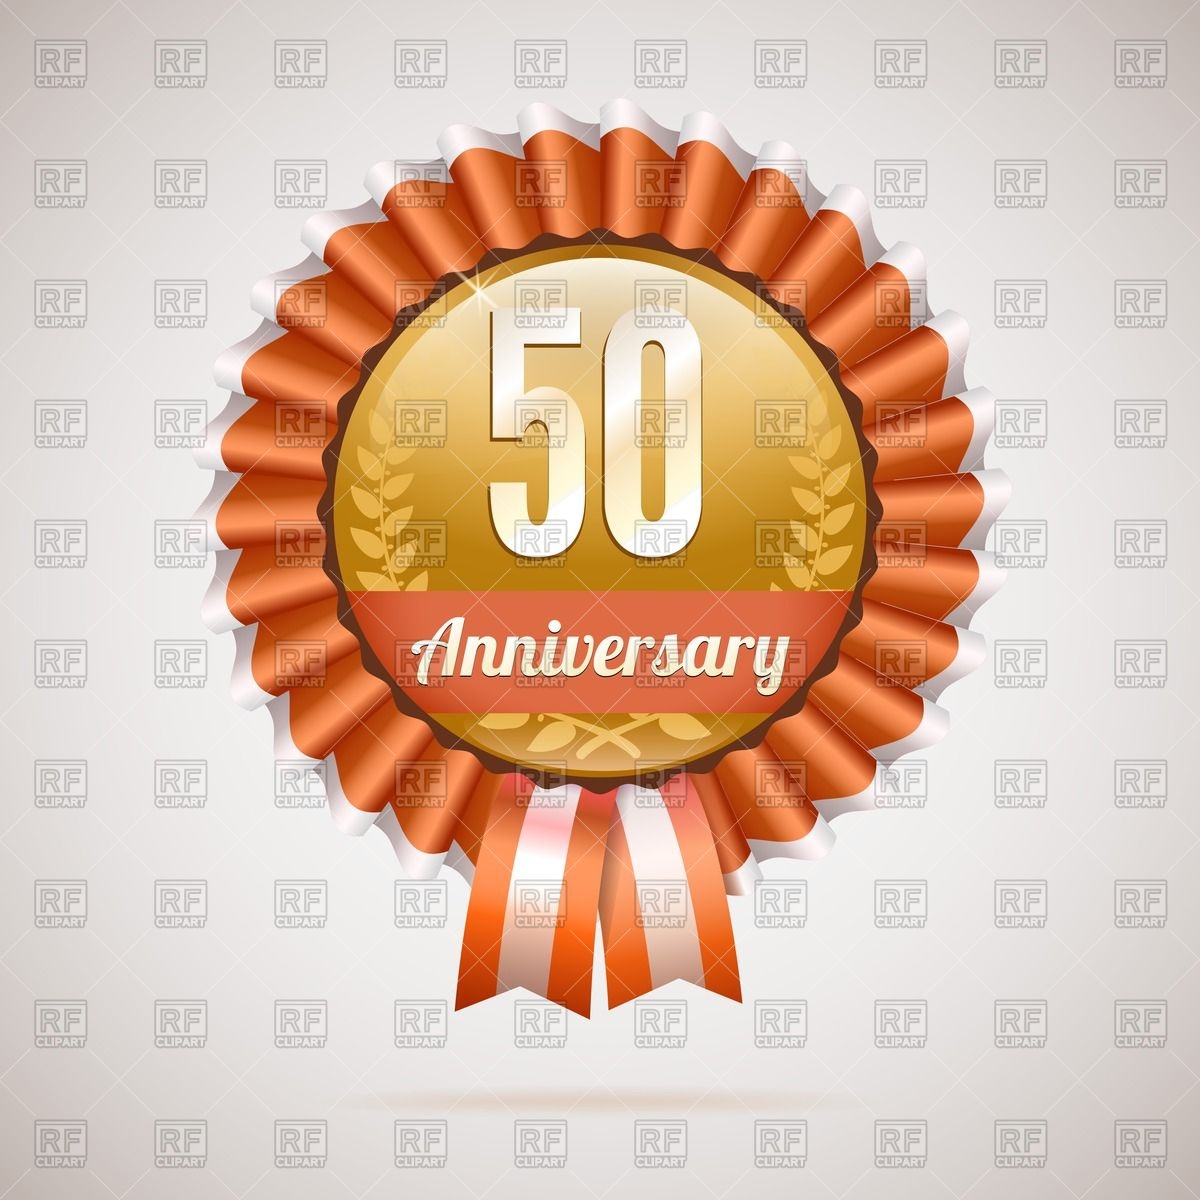 50 Years Anniversary   Rosette With Ribbons Design Elements Download